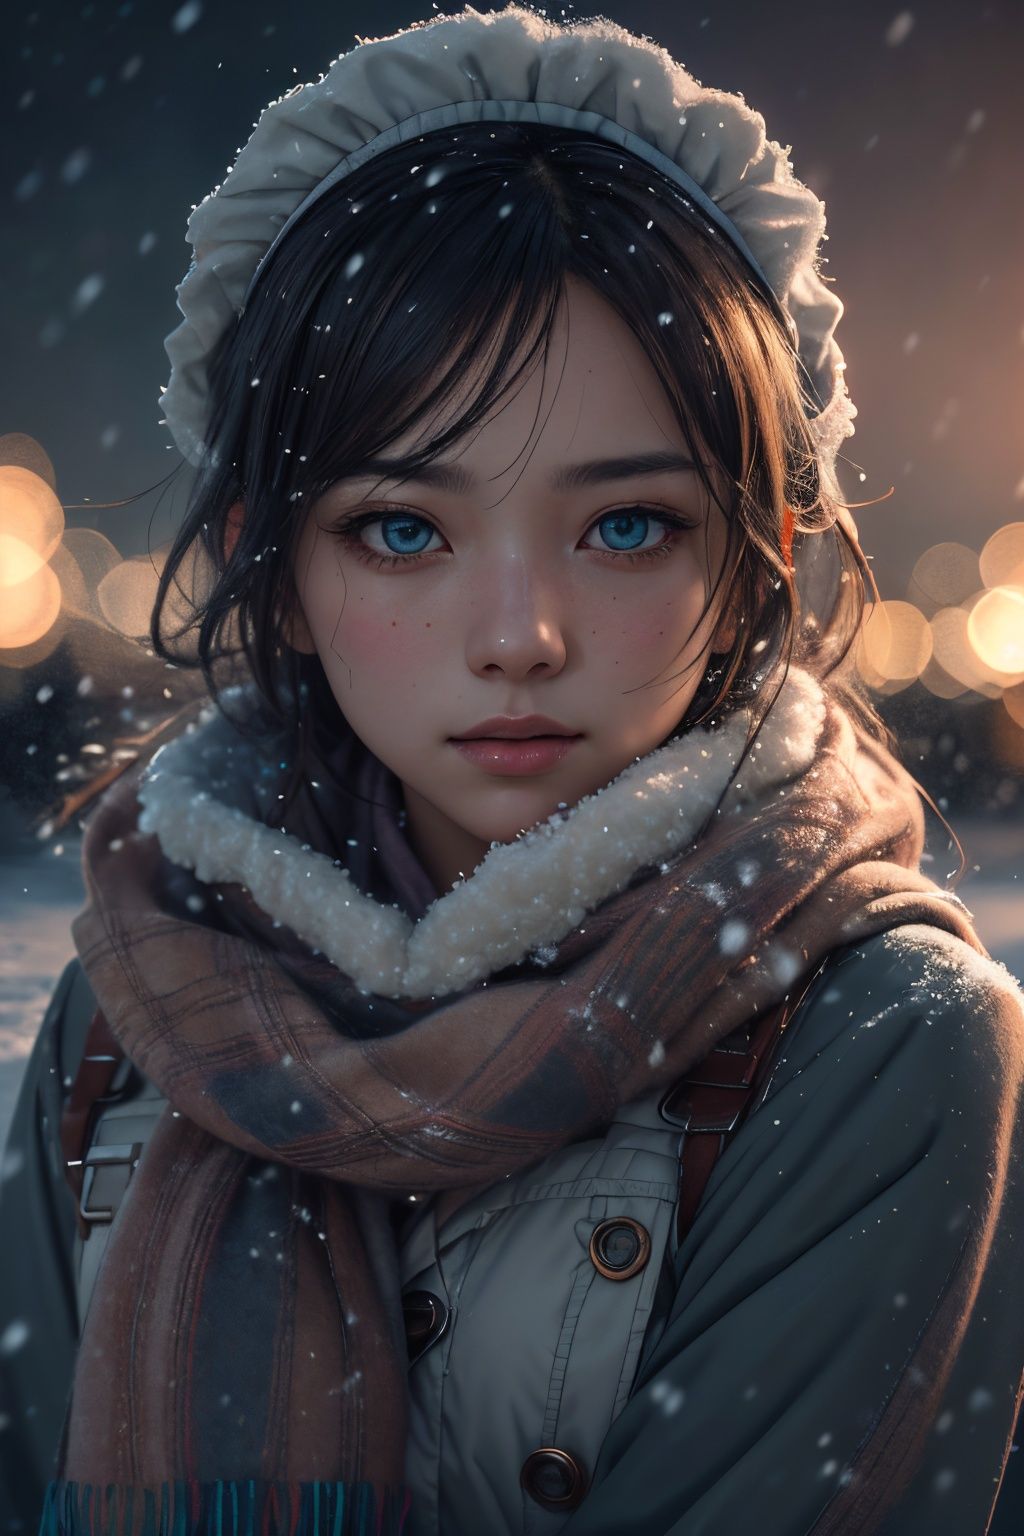  masterpiece,best quality,official art,extremely detailed CG unity 8k wallpaper,girl, upper body, face close up,scarf, maid, snow shelter,exposure blend, medium shot, bokeh, (hdr:1.4), high contrast, (cinematic, teal and orange:0.85), (muted colors, dim colors, soothing tones:1.3),